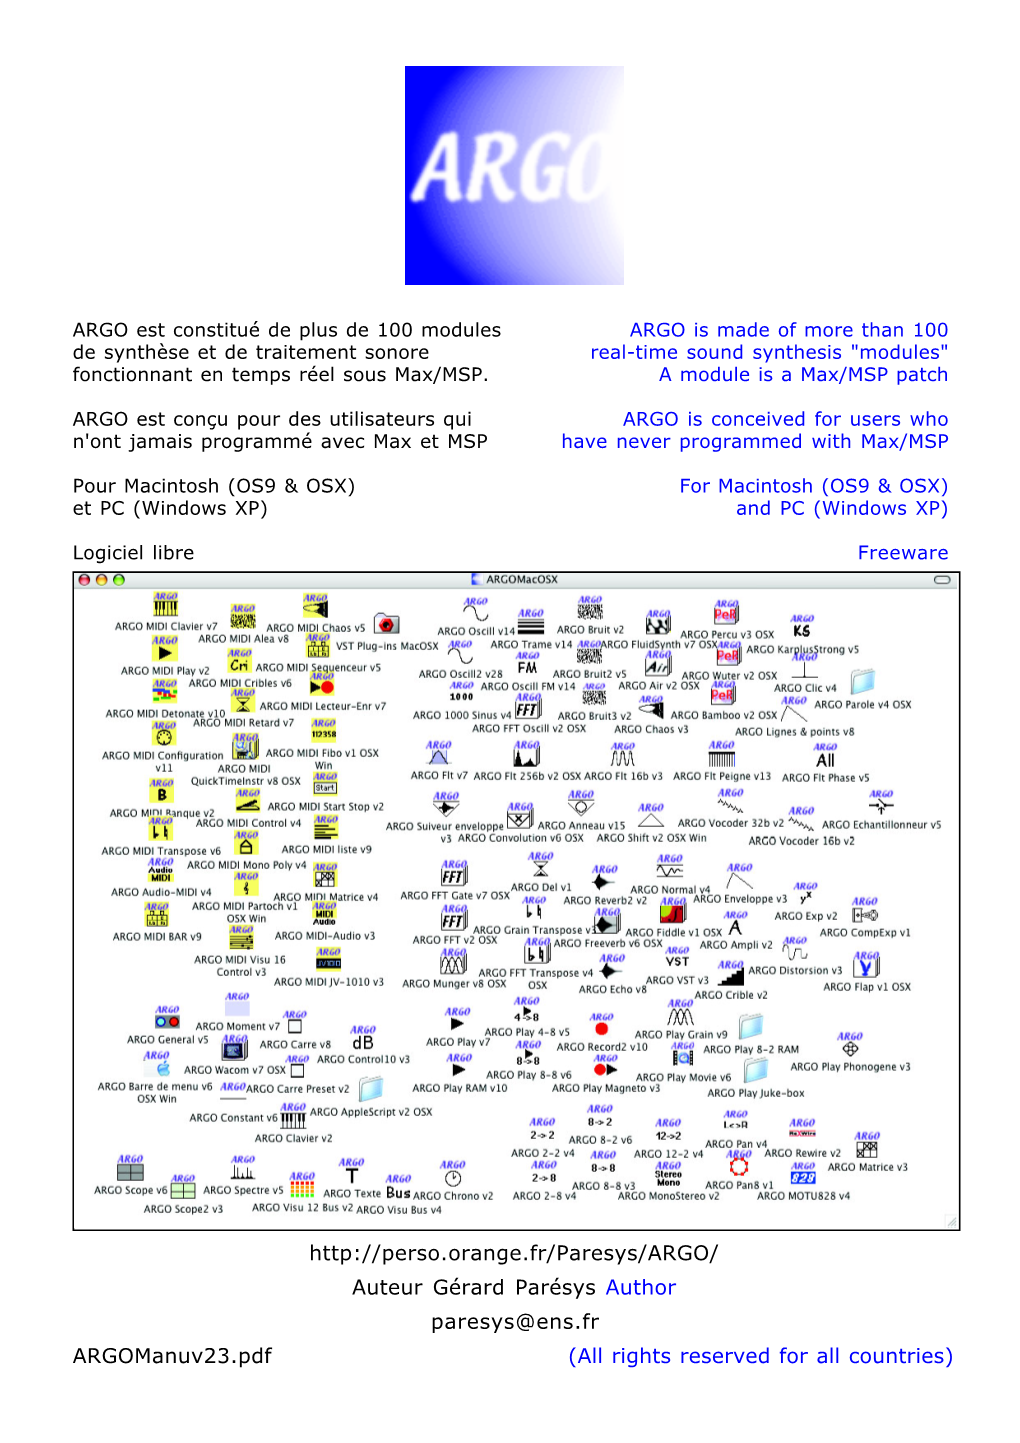 Argomanuv23.Pdf (All Rights Reserved for All Countries) Modules Générateurs Audio Audio Generator Modules